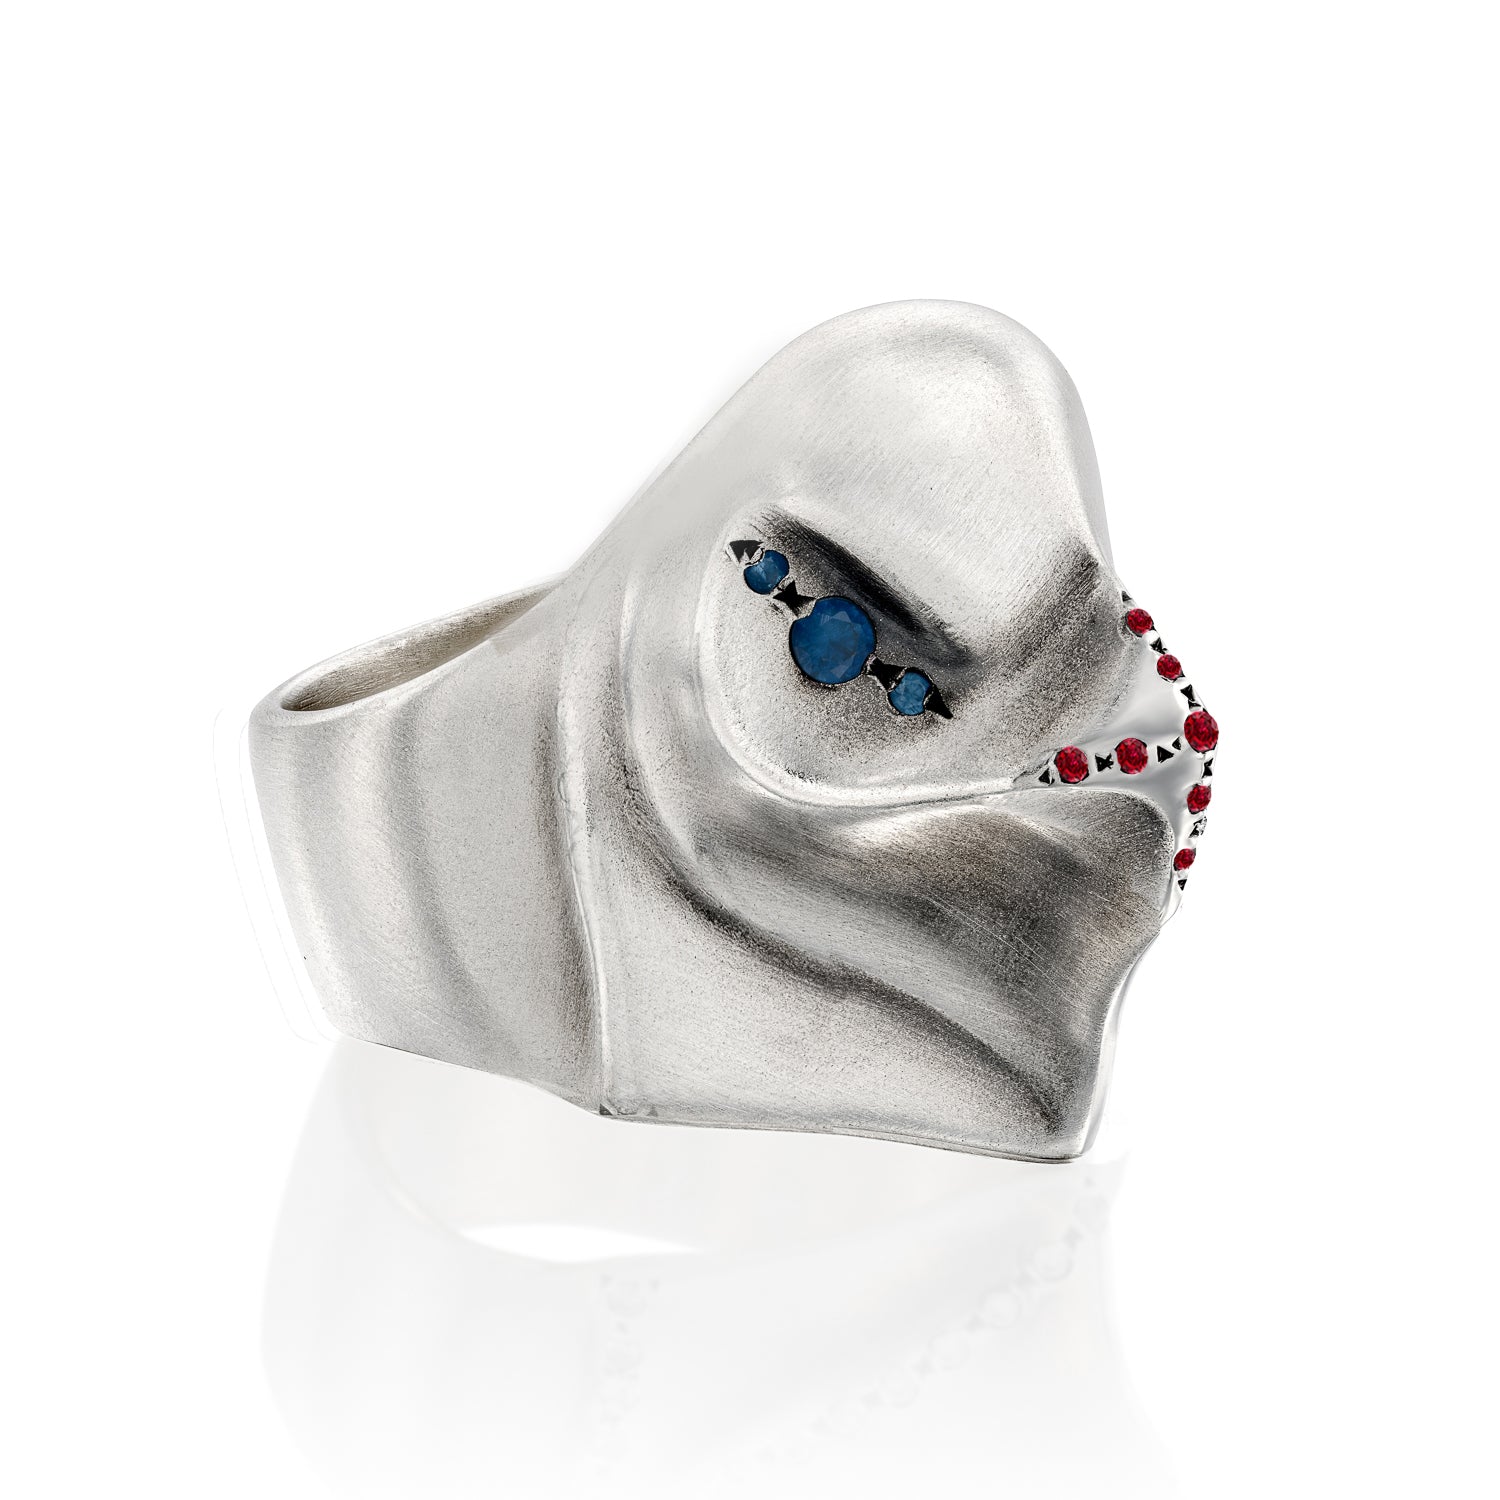 ELINA GLEIZER Limited edition Eagle Ring With Blue Sapphires & Rubys